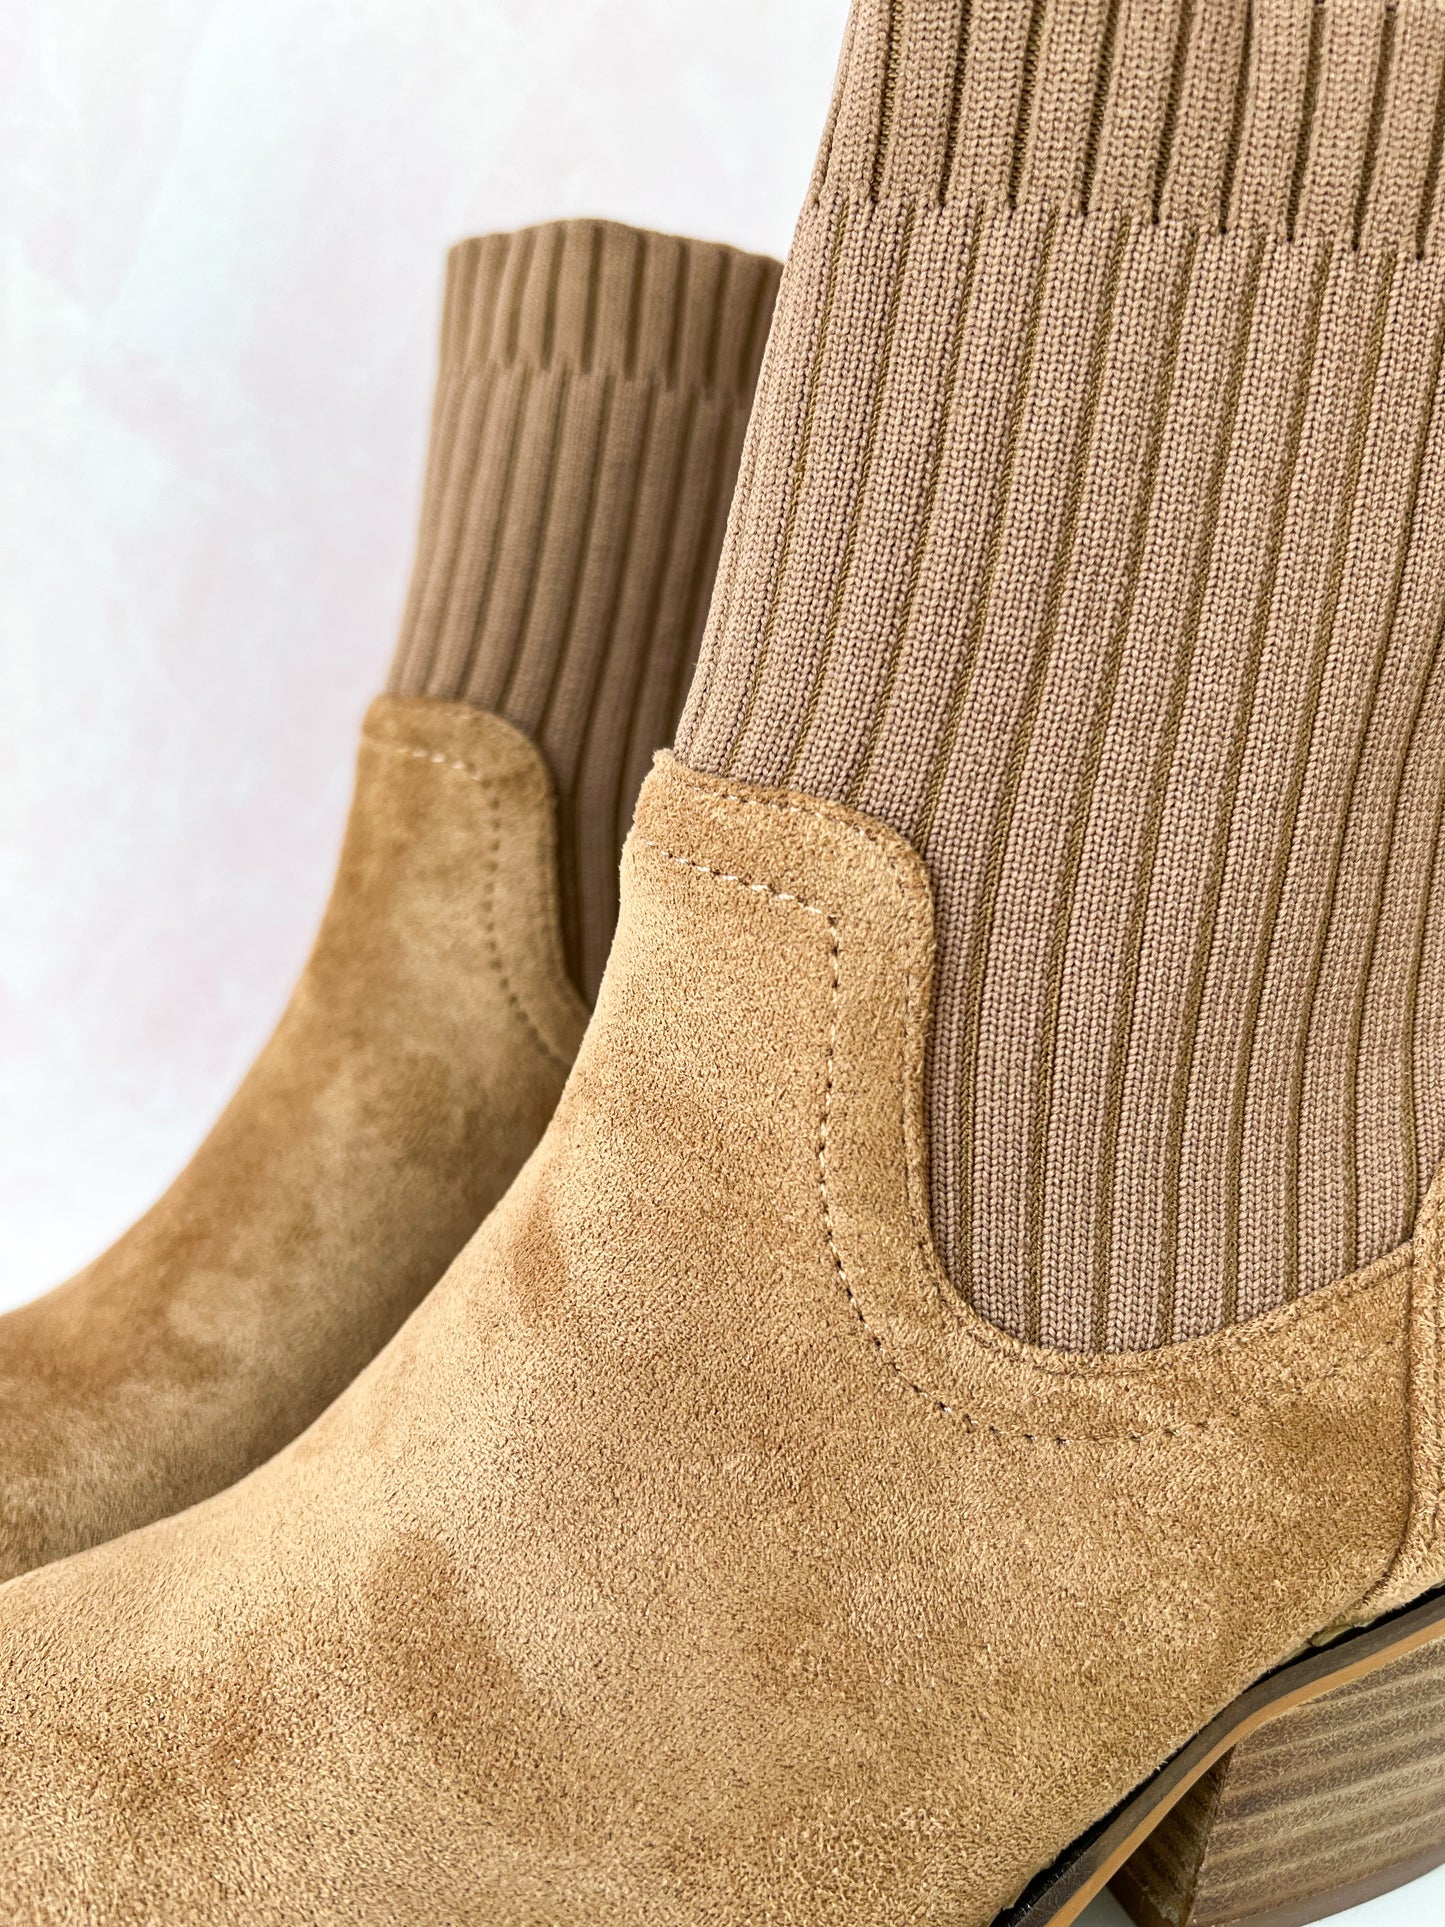 Corky's Crackling Boot - Camel Suede  - Final Sale